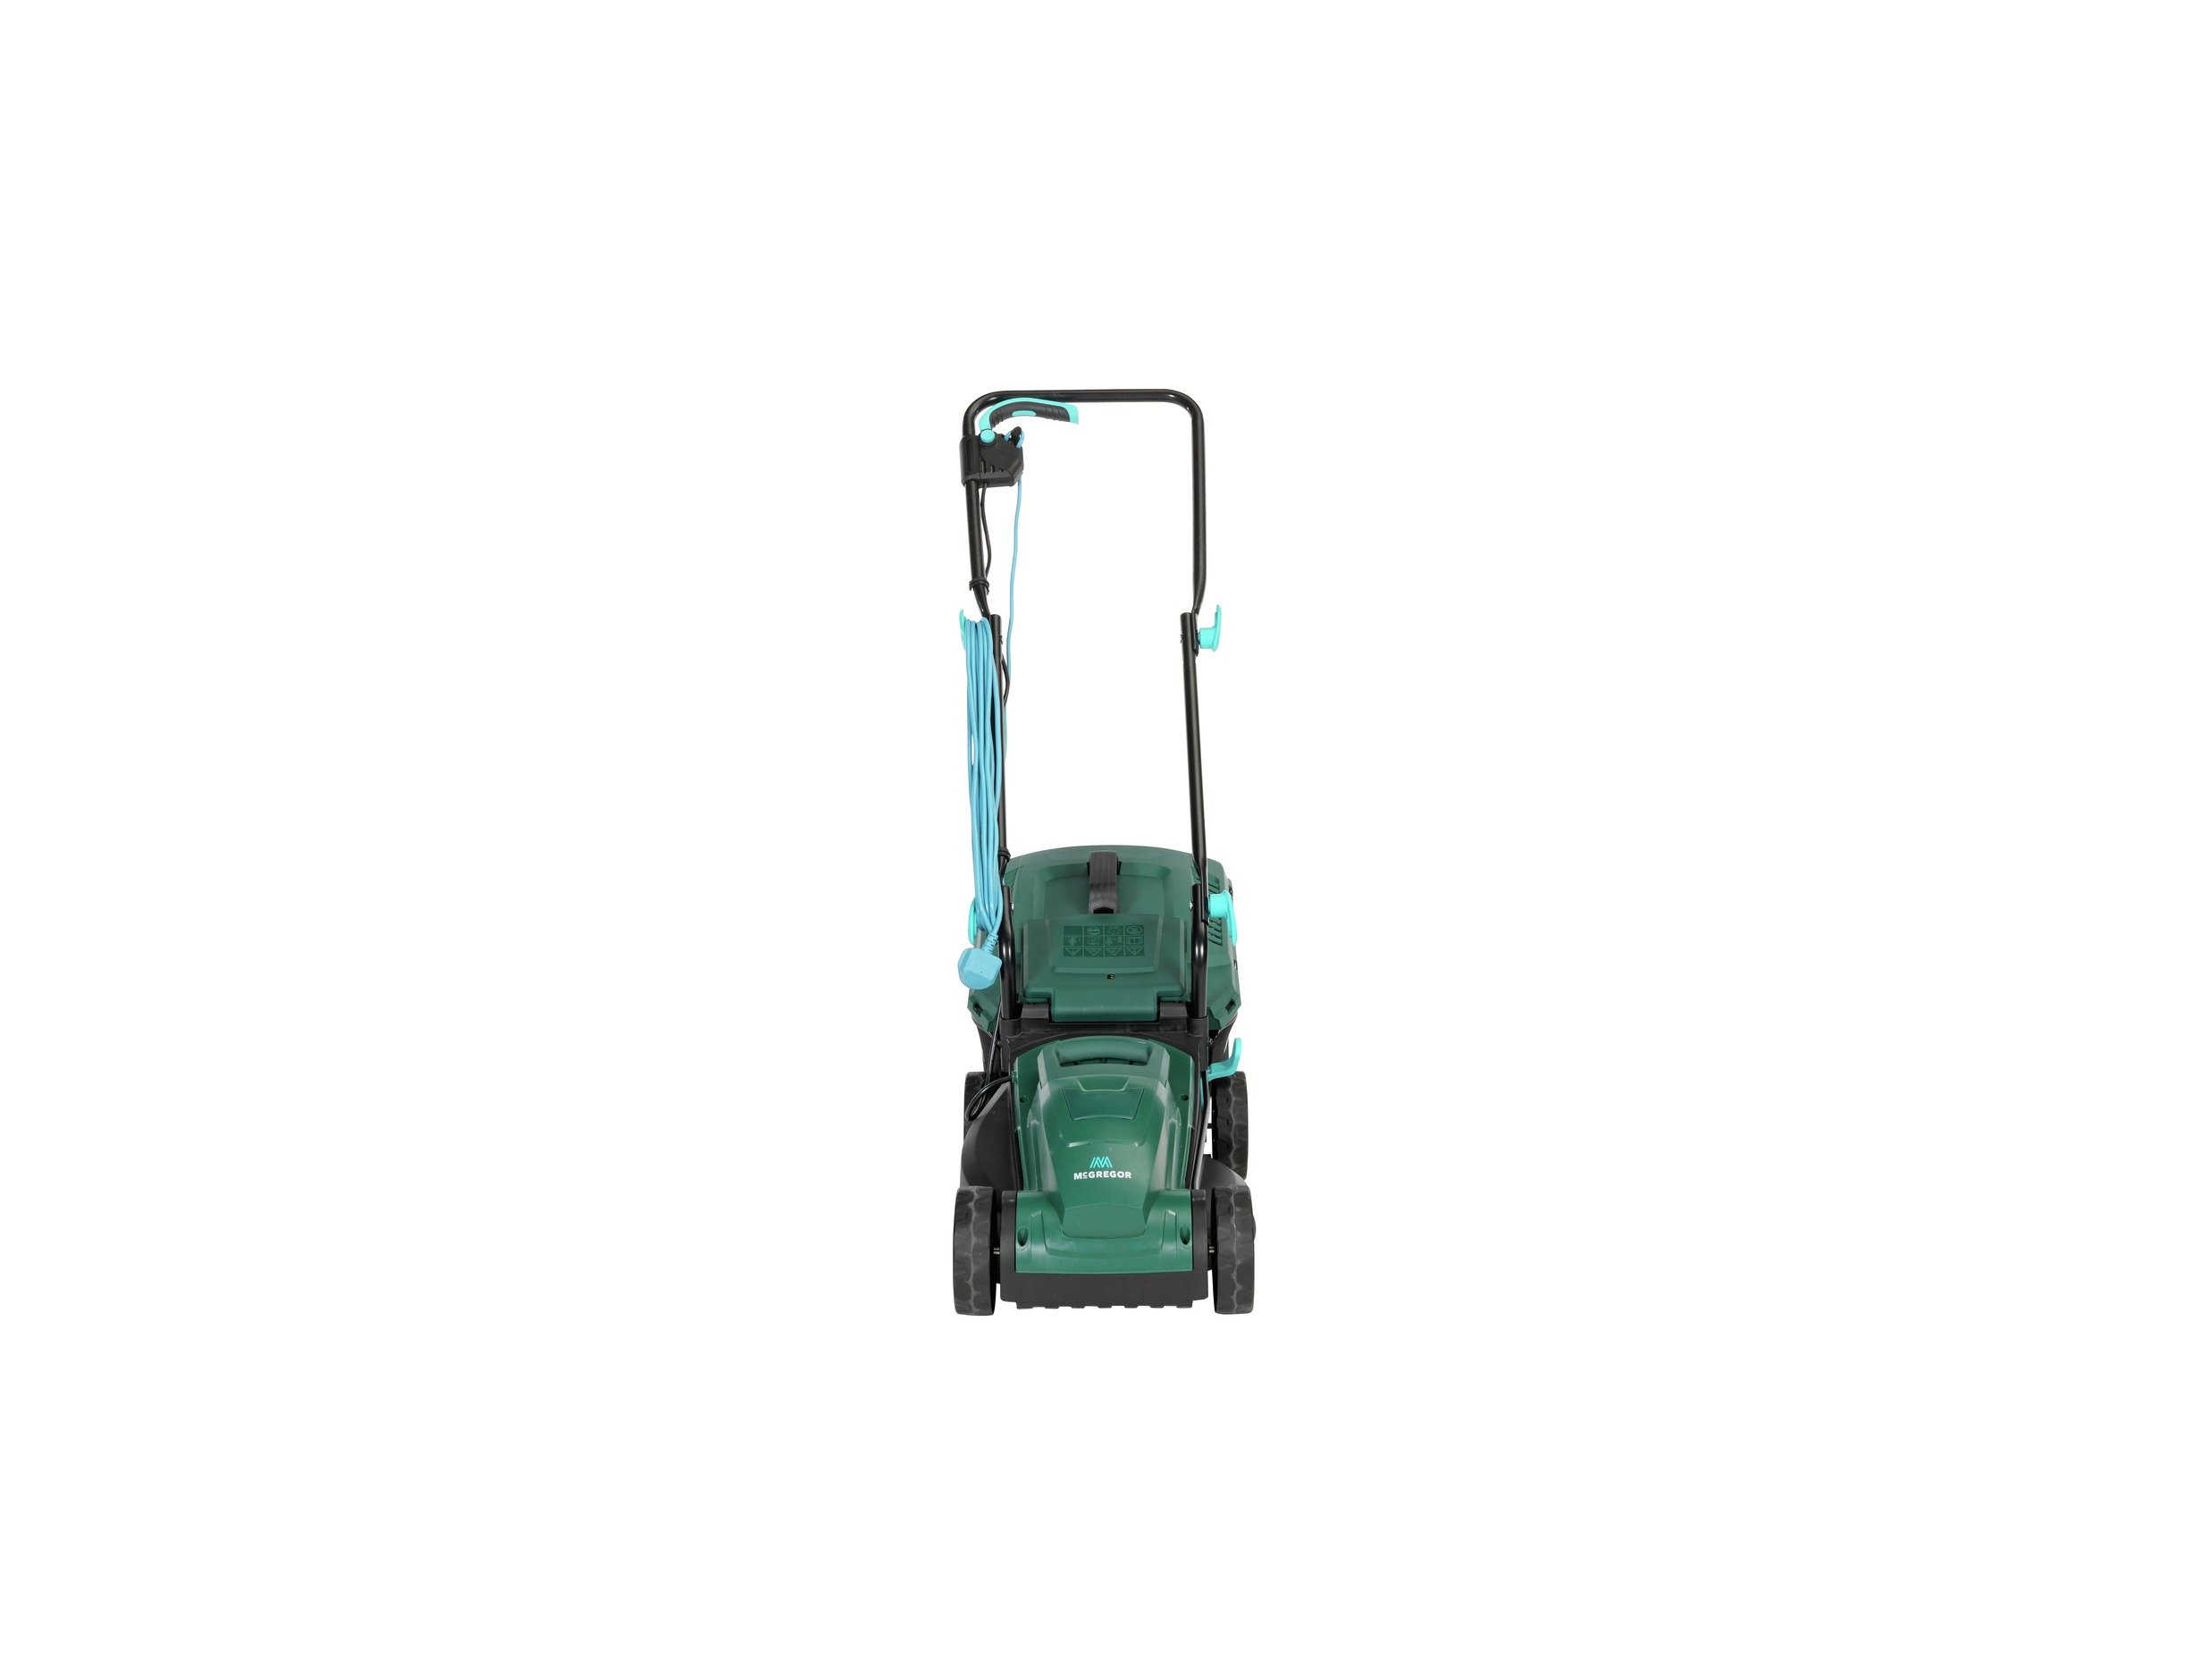 mcgregor 33cm corded rotary lawnmower 1200w and trimmer 250w